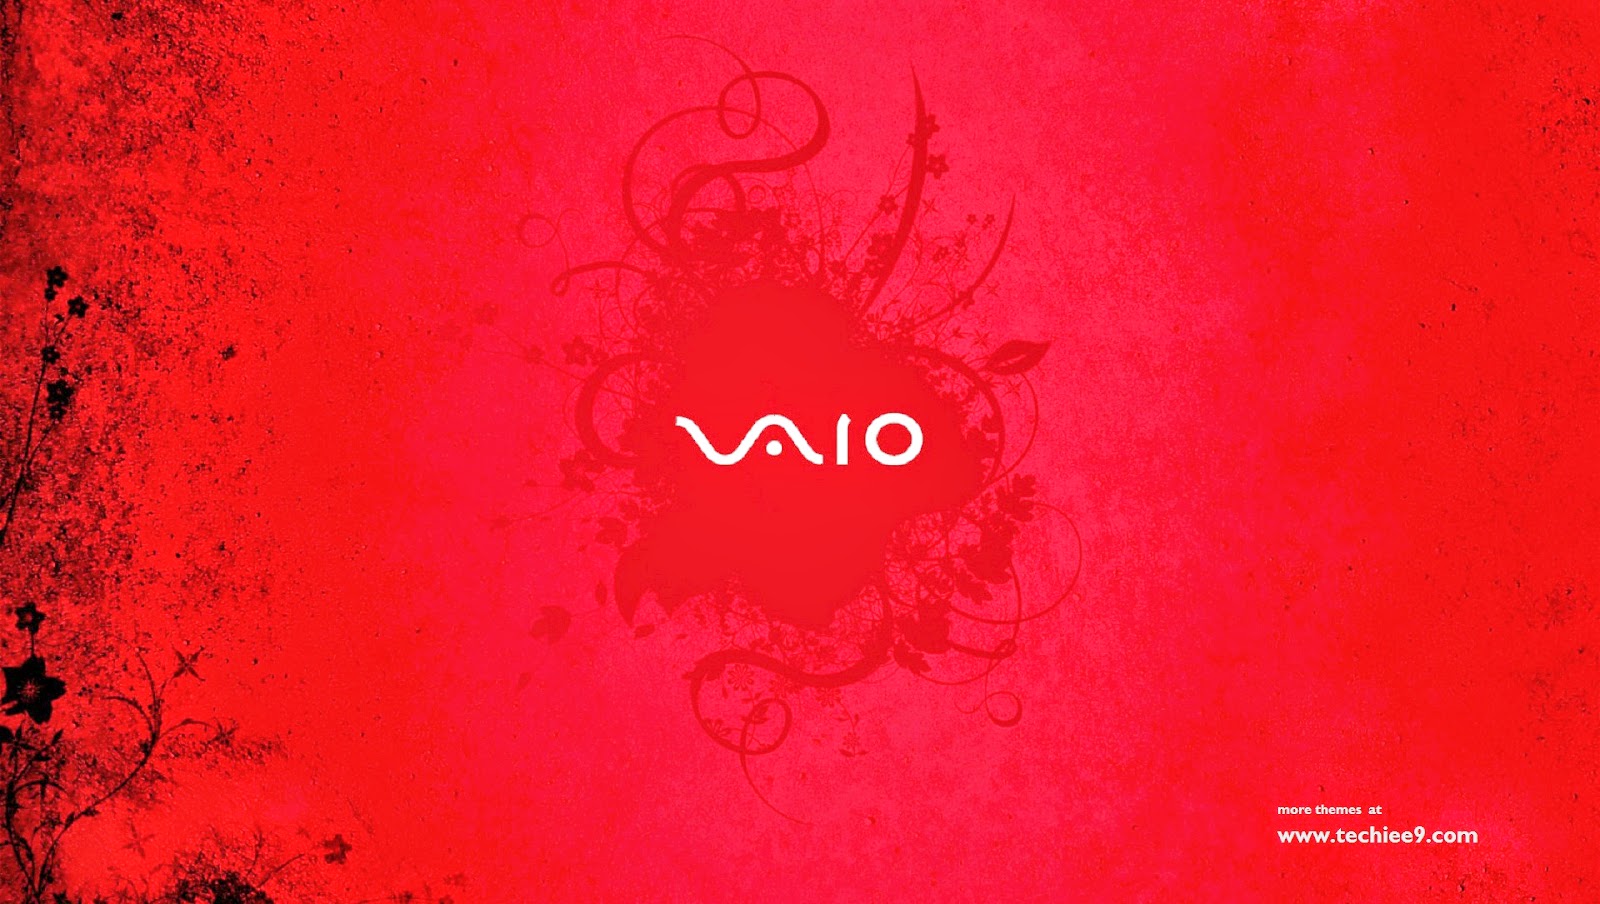 Free Download Sony Vaio Full Hd 19x1080 Widescreen Wallpaper Background Hd 1600x904 For Your Desktop Mobile Tablet Explore 50 Vaio Wallpaper 19x1080 Sony Wallpapers 19x1080 Sony Vaio Wallpaper Backgrounds